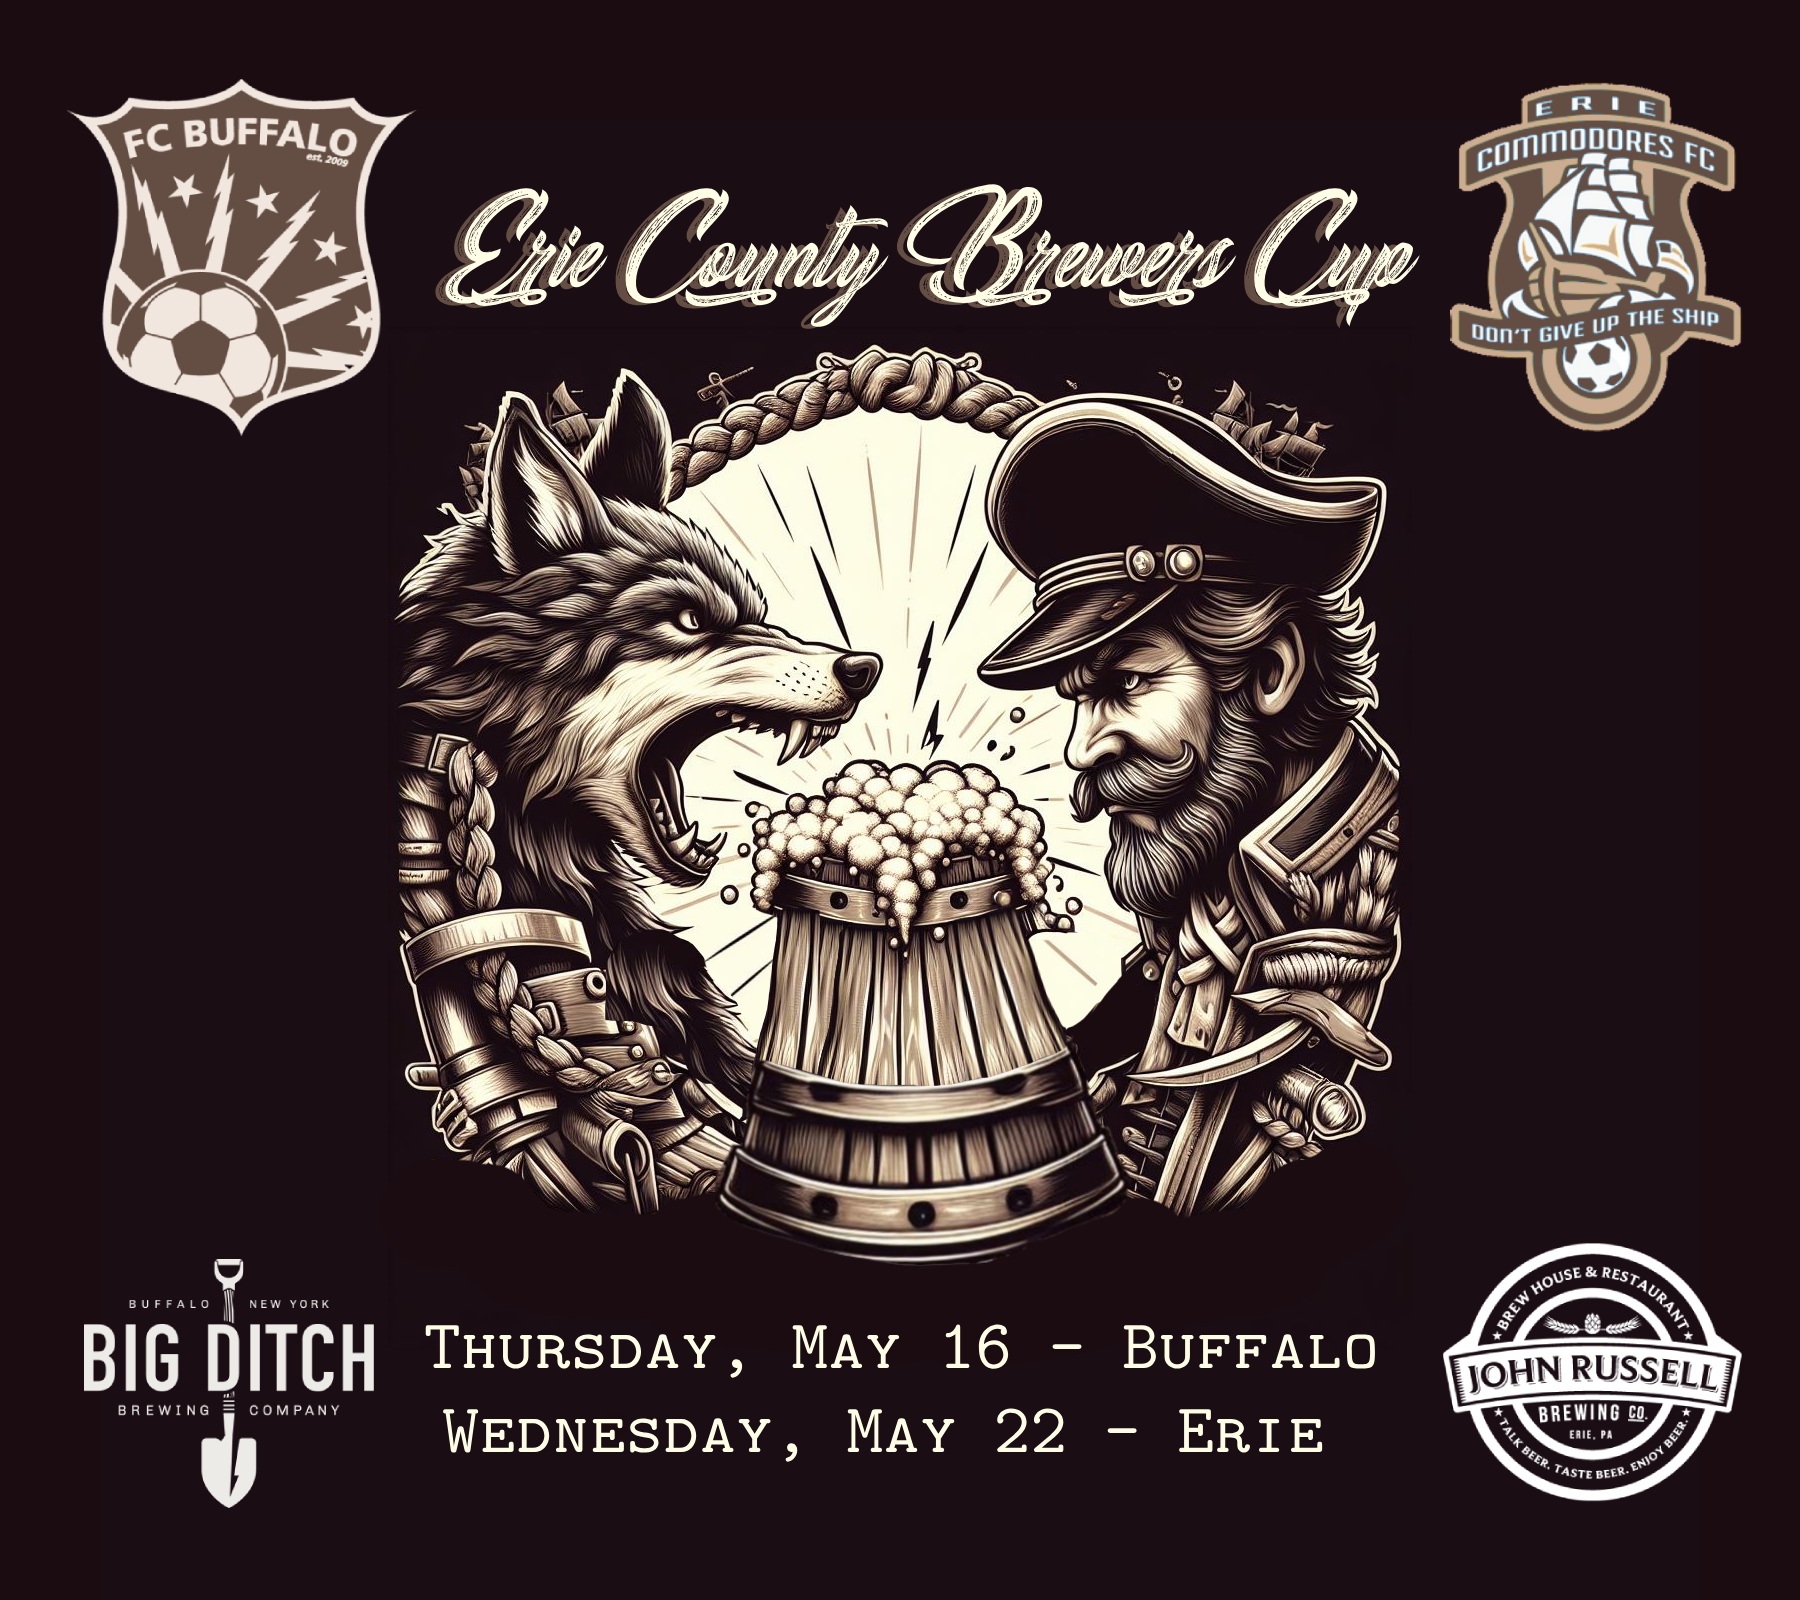 Brewers Cup graphic